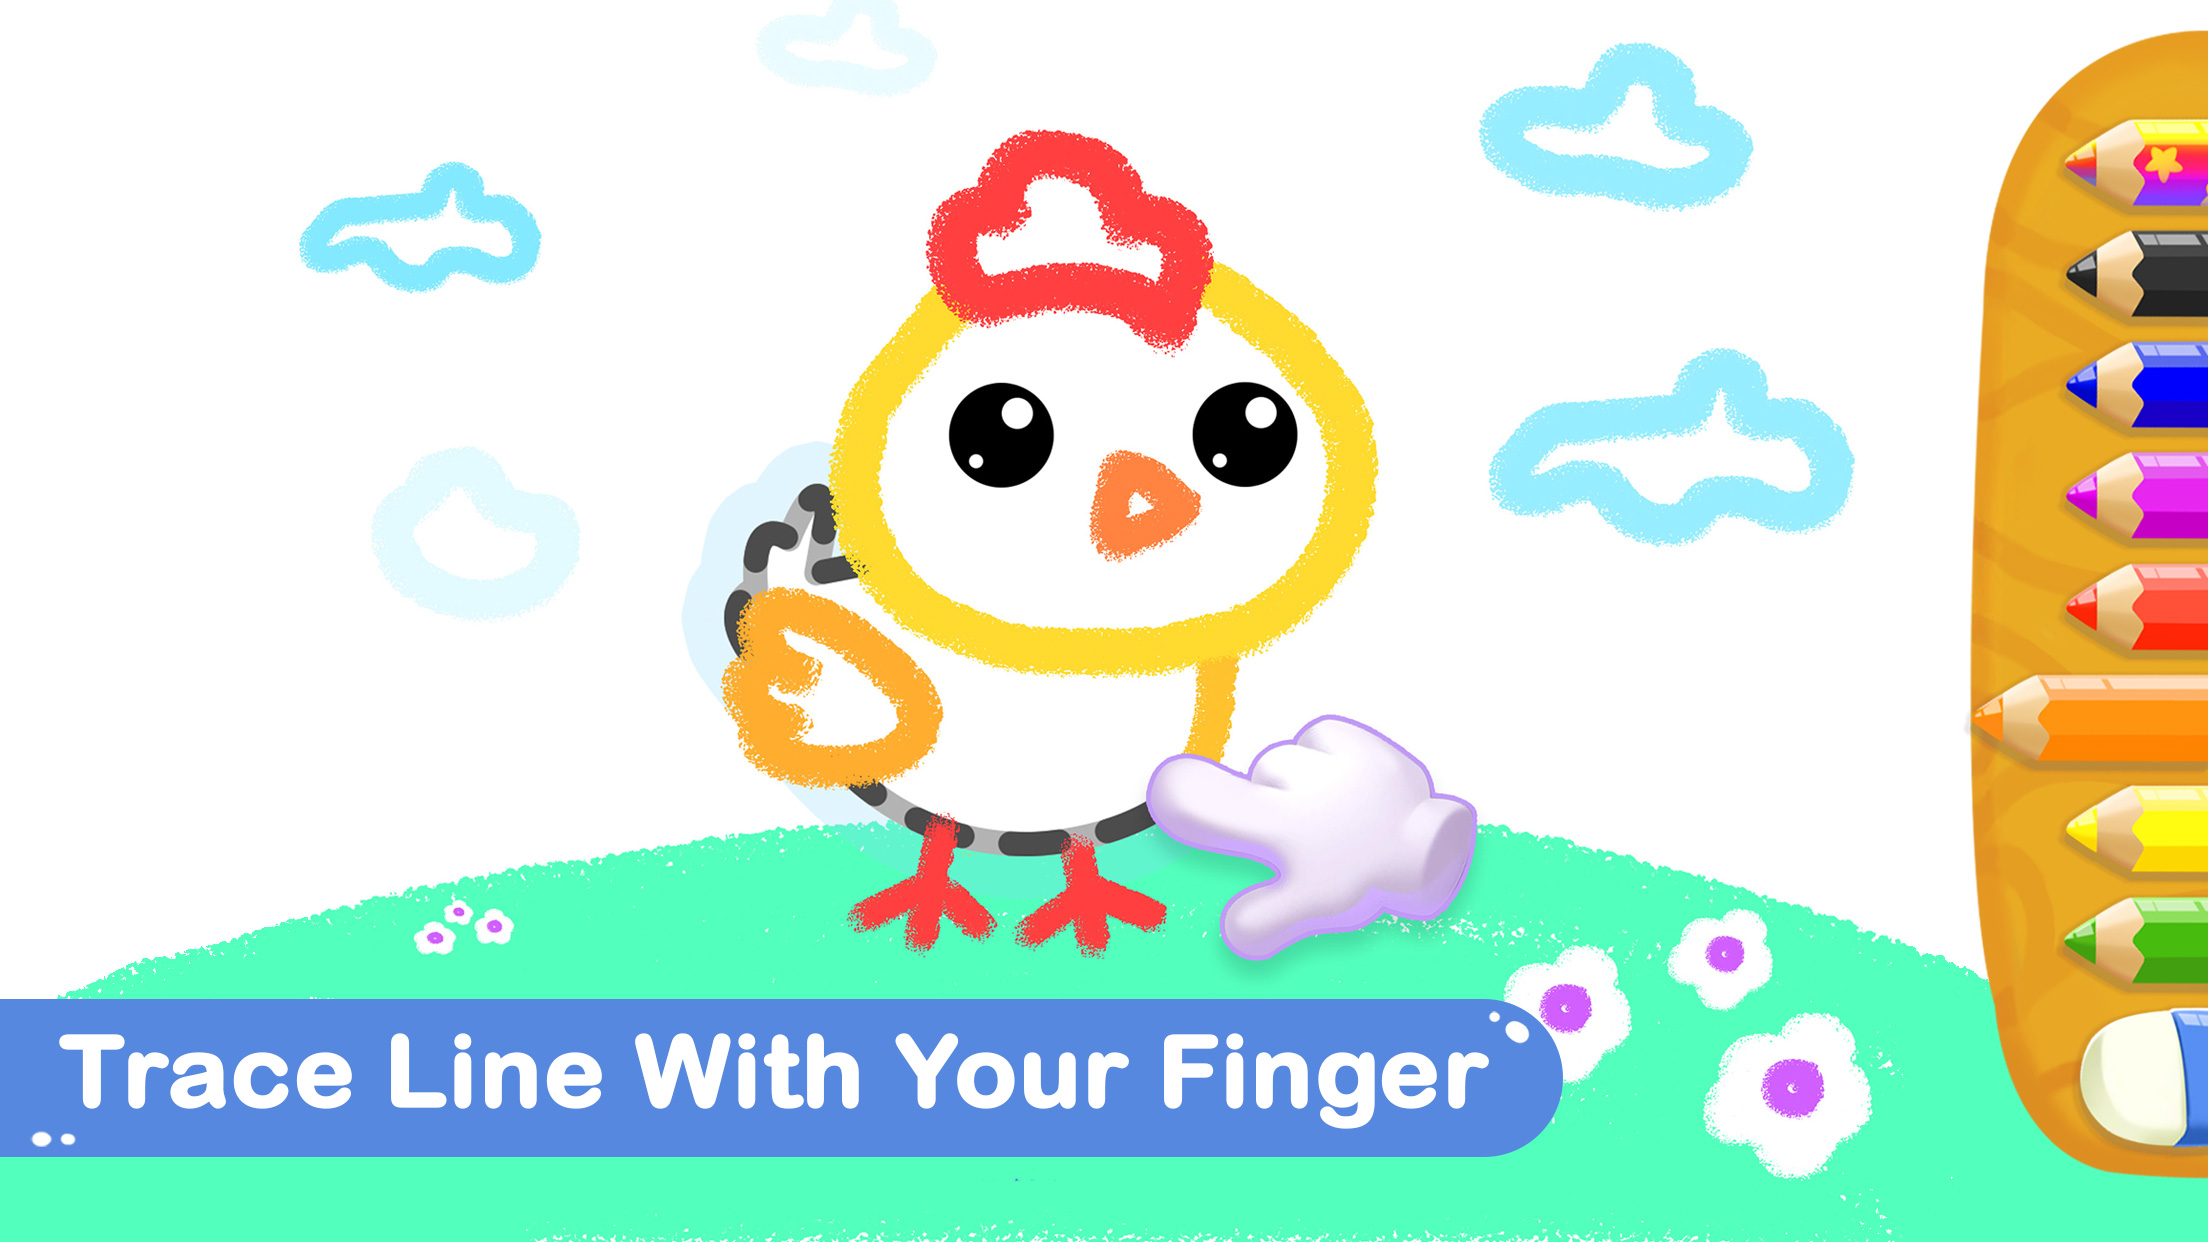 Play Bini Toddler Drawing Games! Online for Free on PC & Mobile